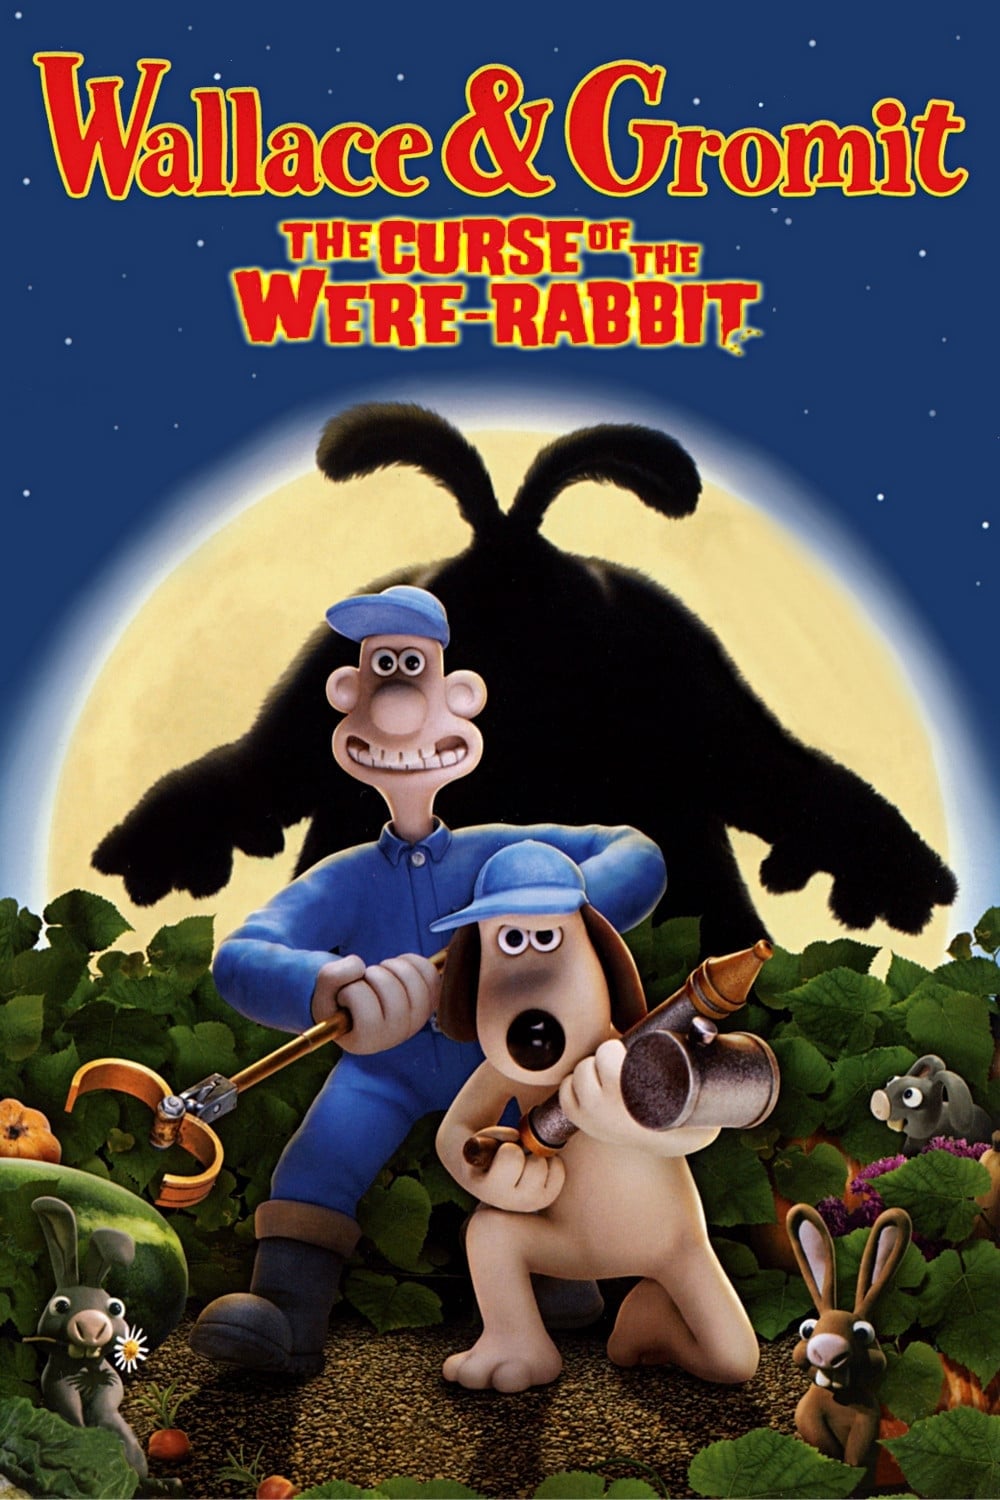 Wallace & Gromit: Lời Nguyền Của Ma Thỏ (Wallace & Gromit: The Curse of the Were-Rabbit) [2005]